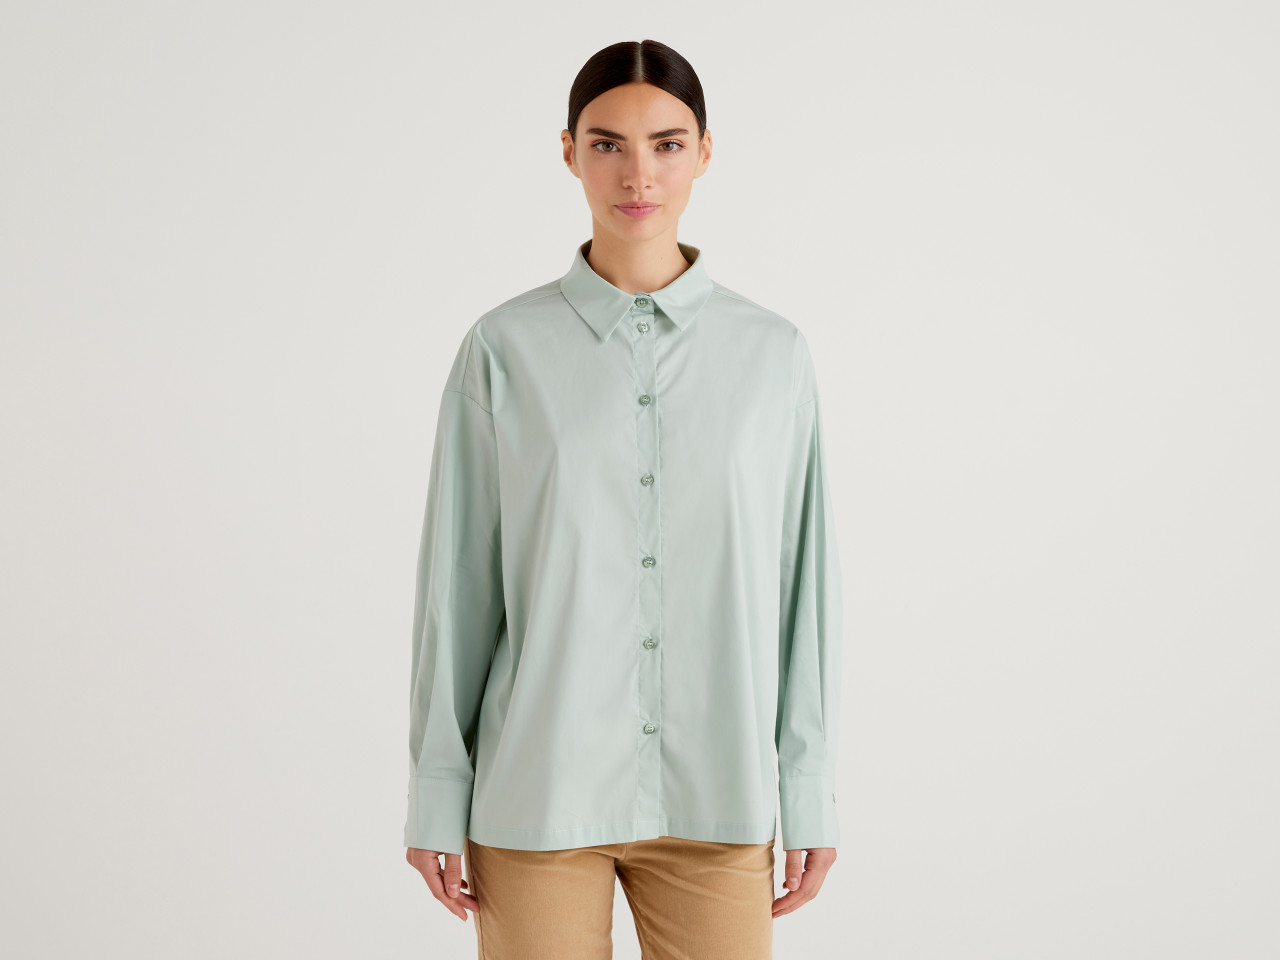 Fashion Blouses Shirt-Blouses United Colors of Benetton Shirt Blouse turquoise-white allover print casual look 